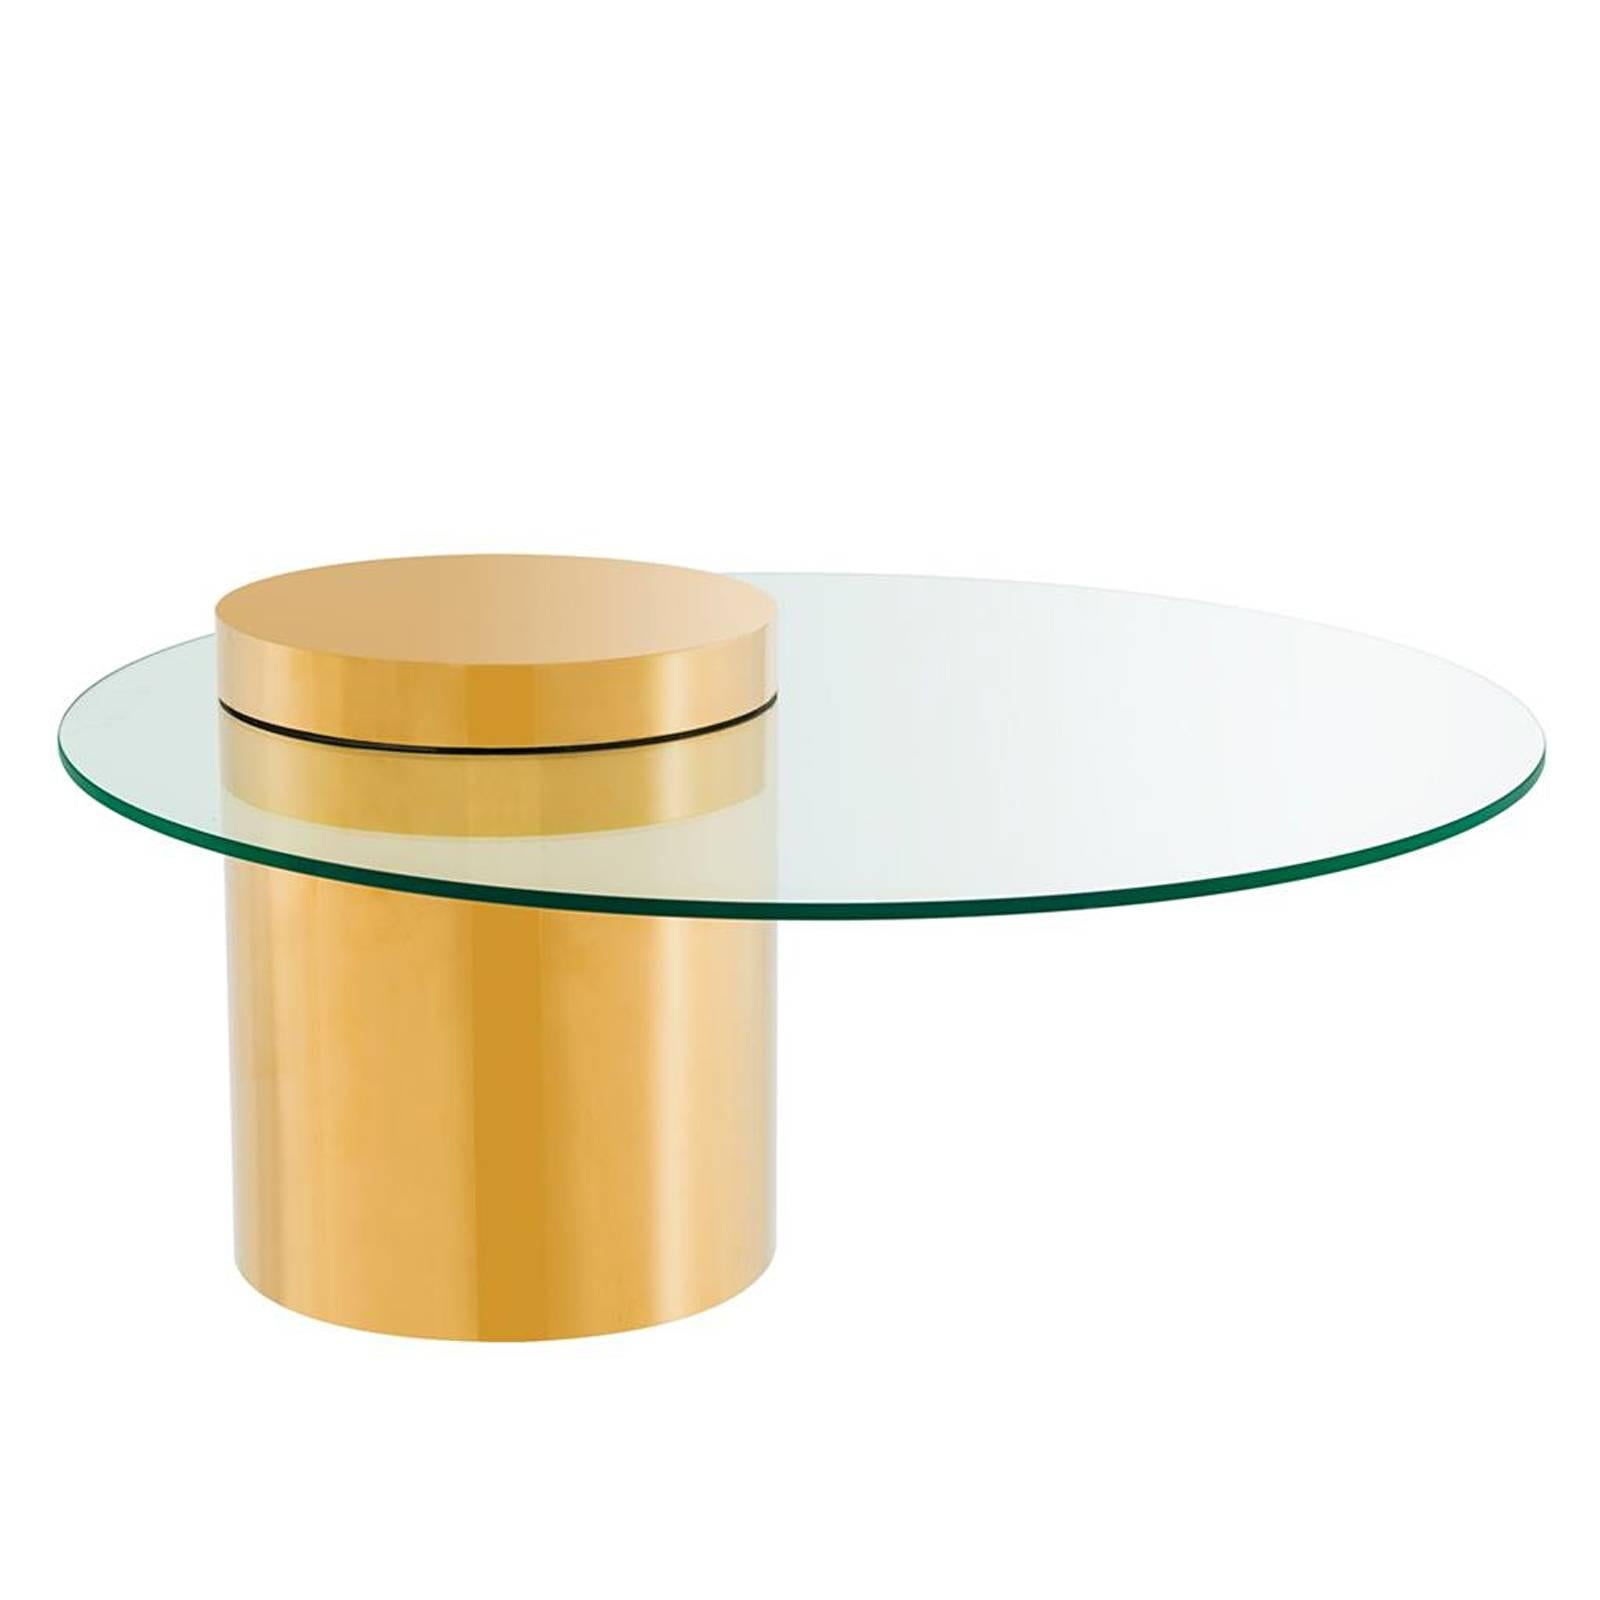 Coffee table balance with stainless steel structure
in gold finish. With clear glass top. 
Also available in side table.
